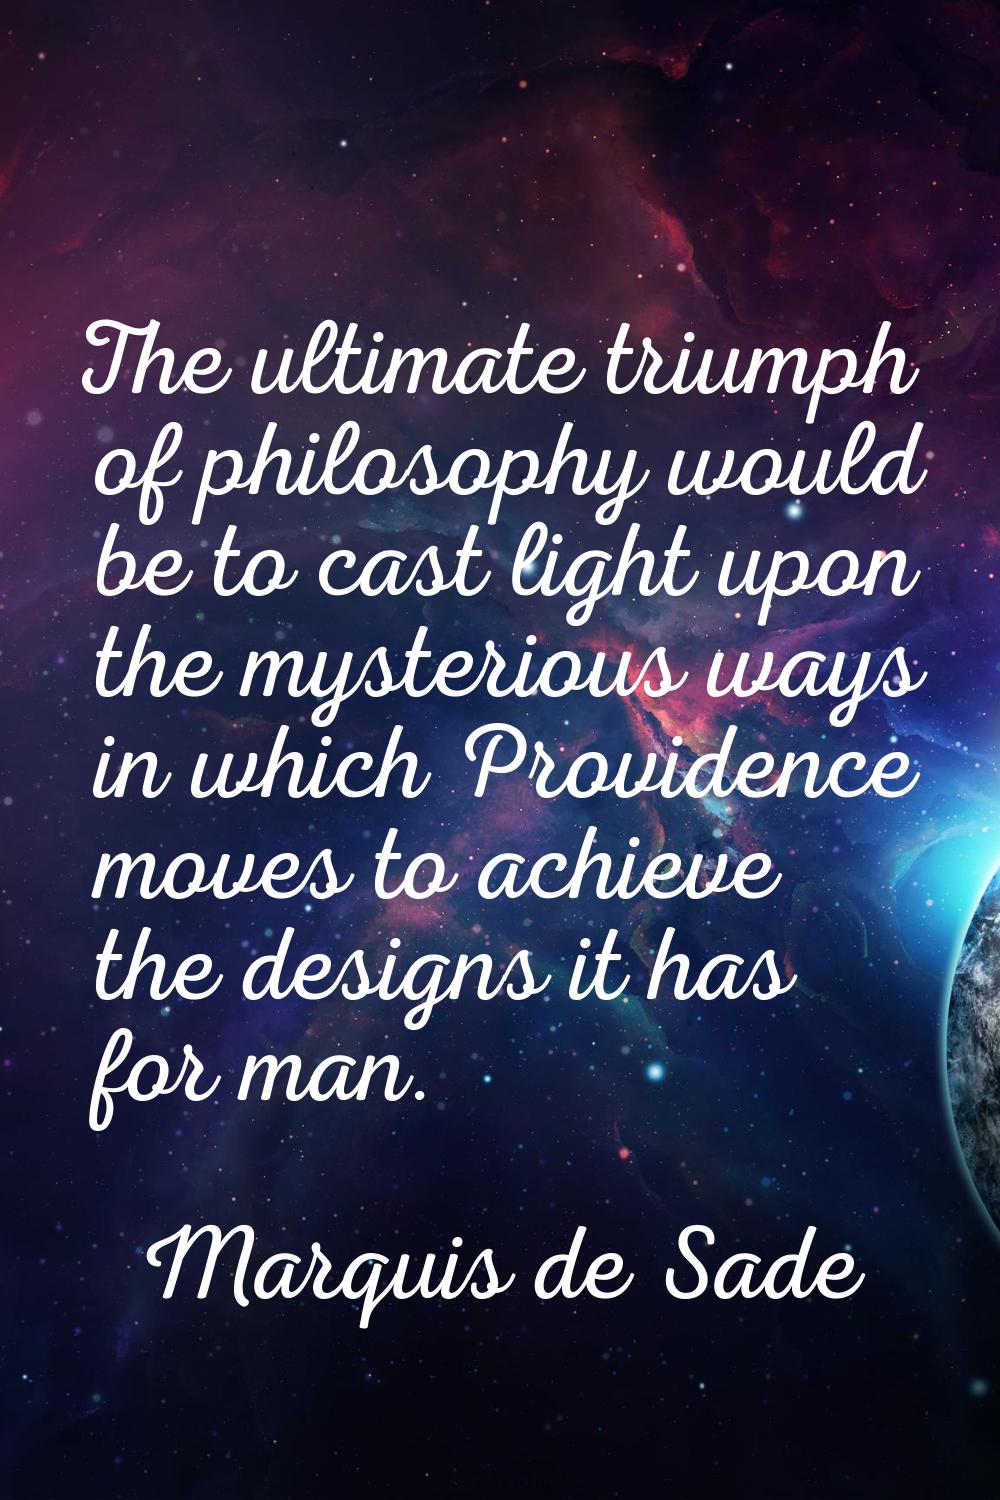 The ultimate triumph of philosophy would be to cast light upon the mysterious ways in which Provide